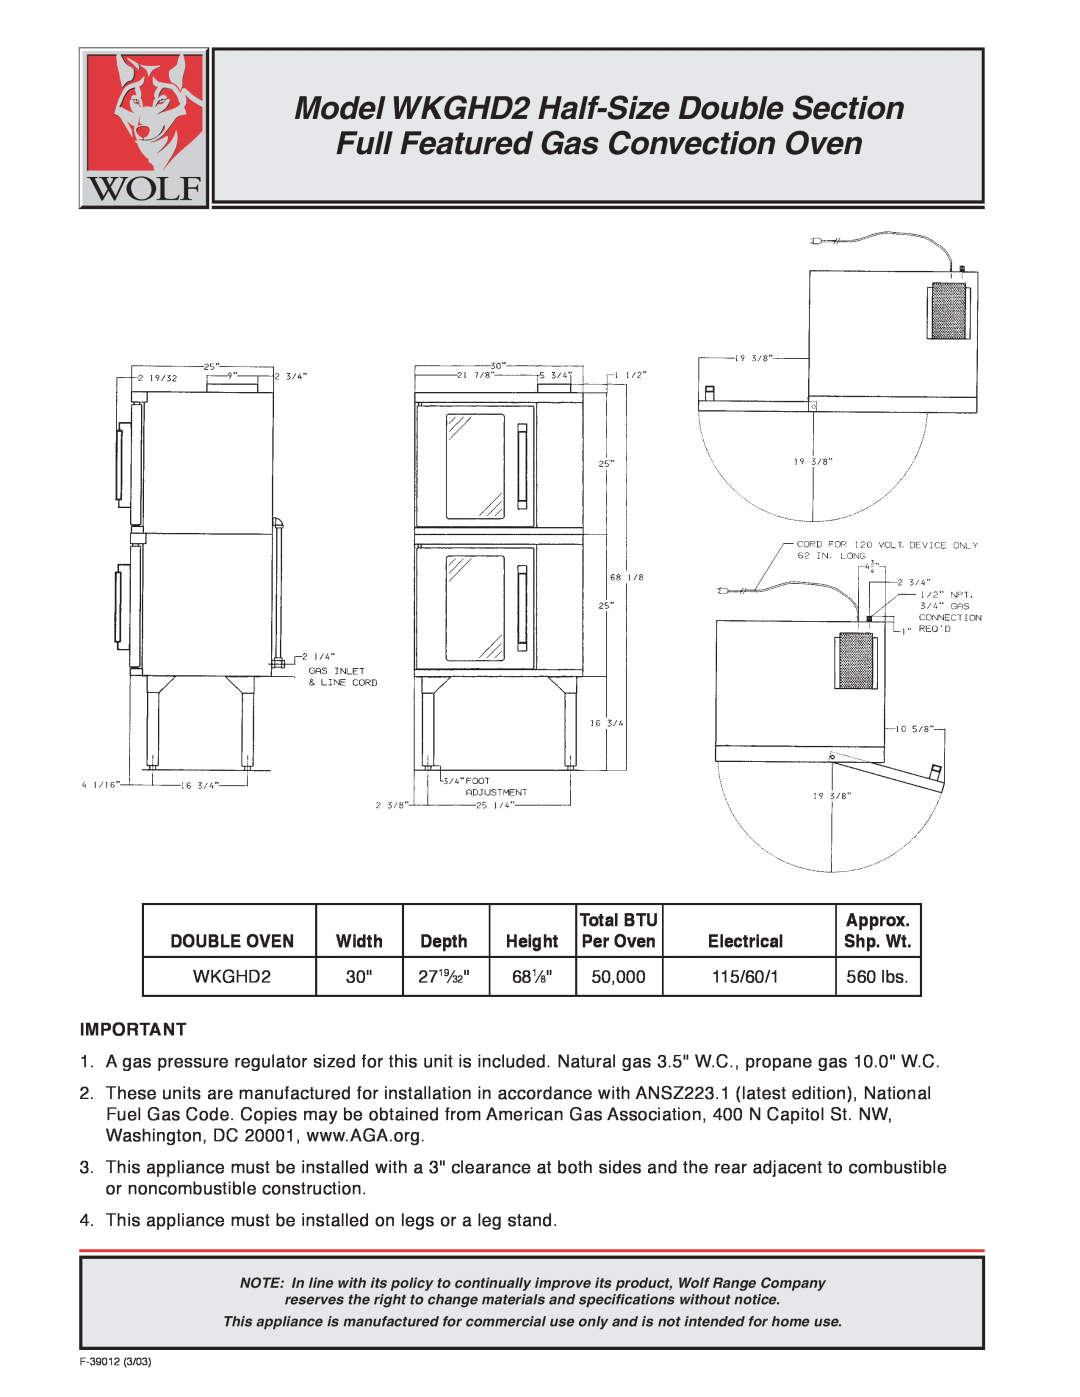 Wolf warranty Total BTU, Approx, Double Oven, Depth, Shp. Wt, Model WKGHD2 Half-Size Double Section 